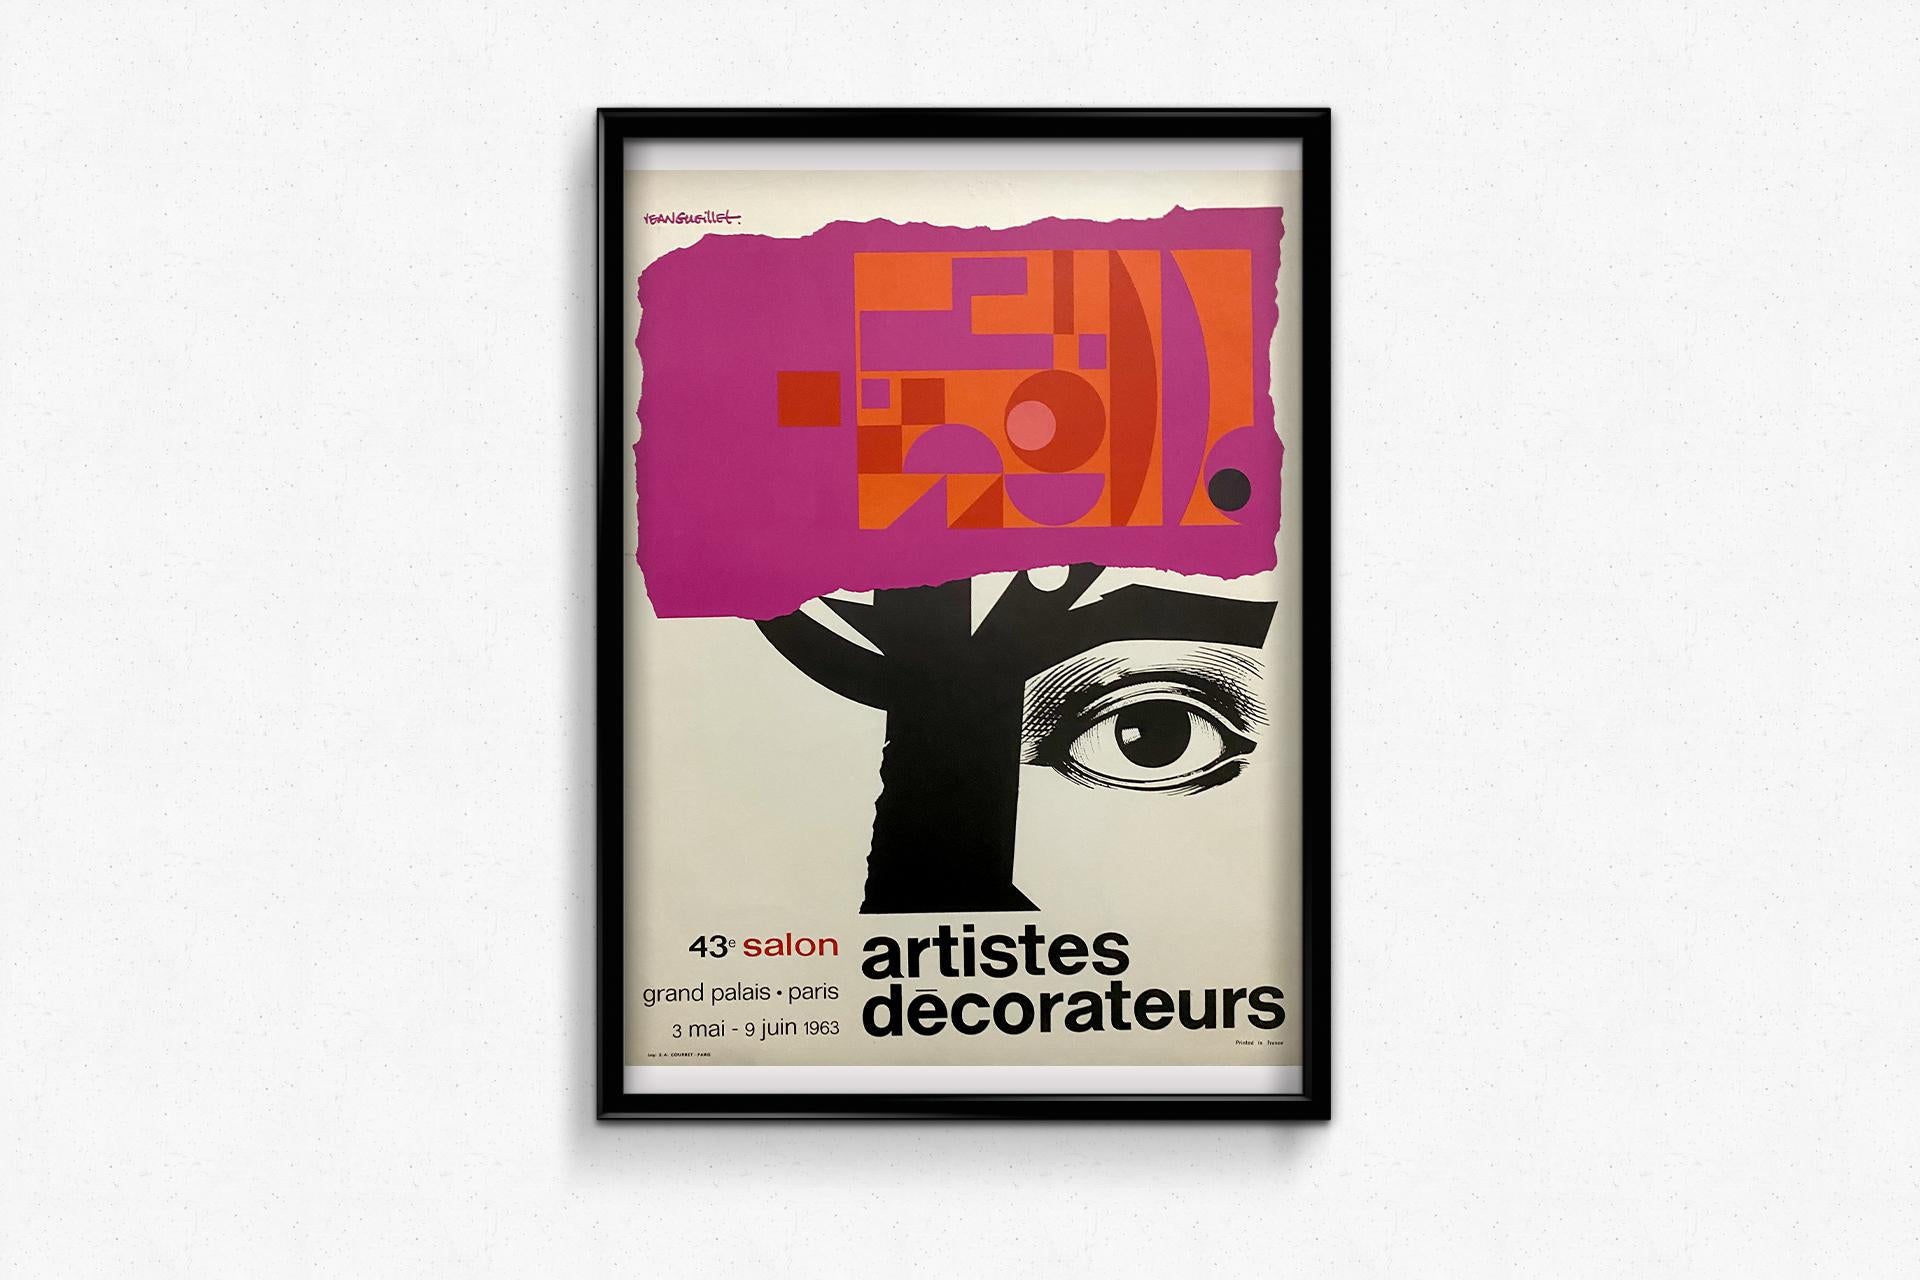 Beautiful poster made in 1963 by Jean Gueillet to promote the 43rd exhibition of artists and decorators held at the Grand Palais in Paris.

Exhibition - Abstract - Grand Palais

S.A. Courbet - Paris